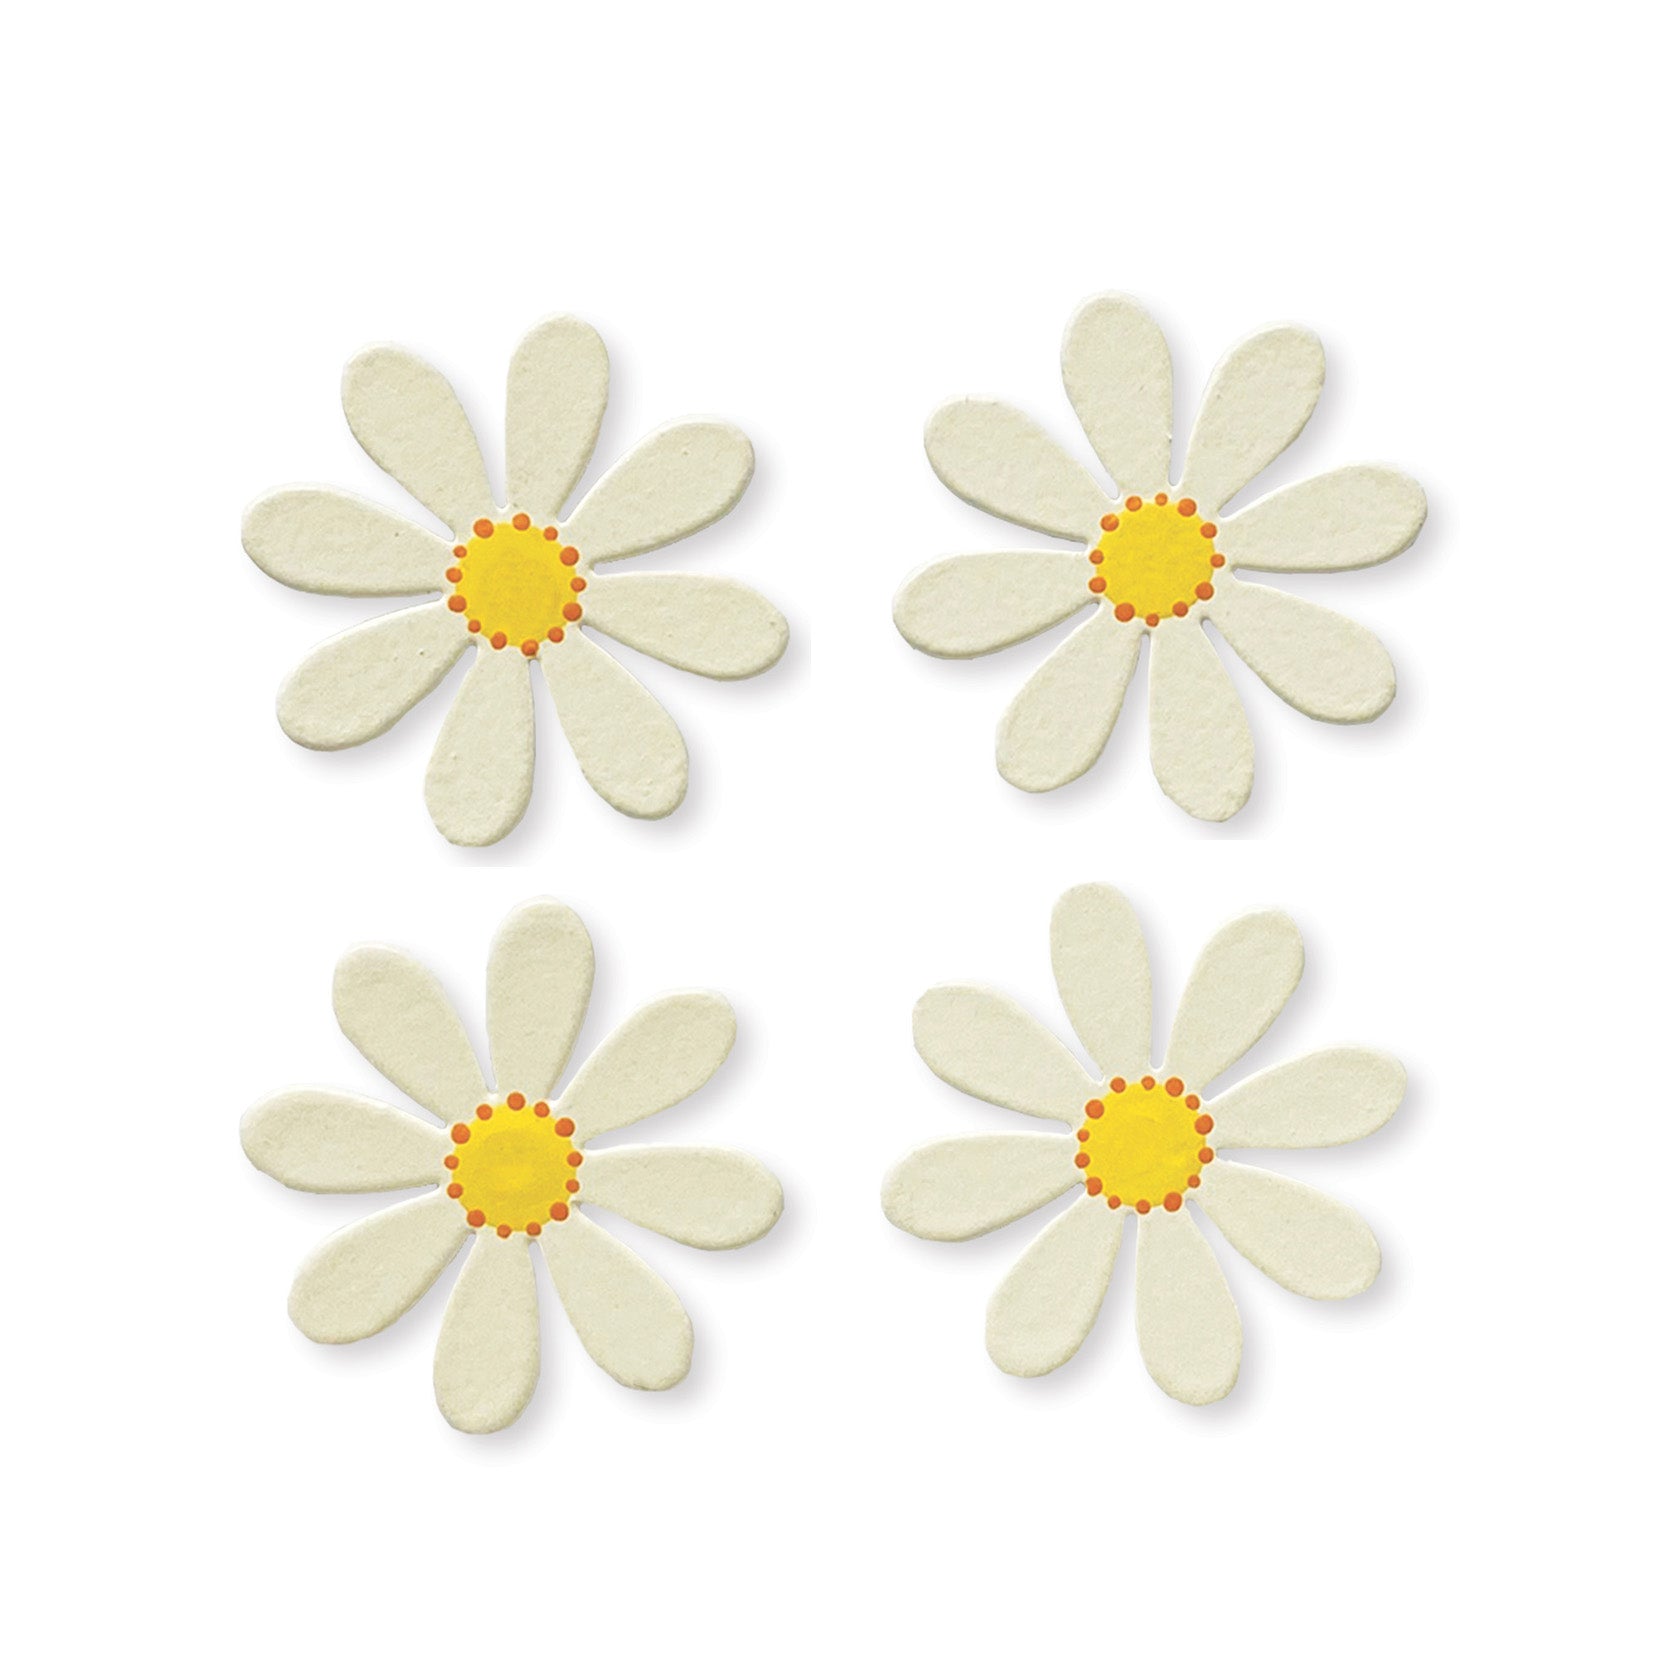 Daisy Magnets S/4 White